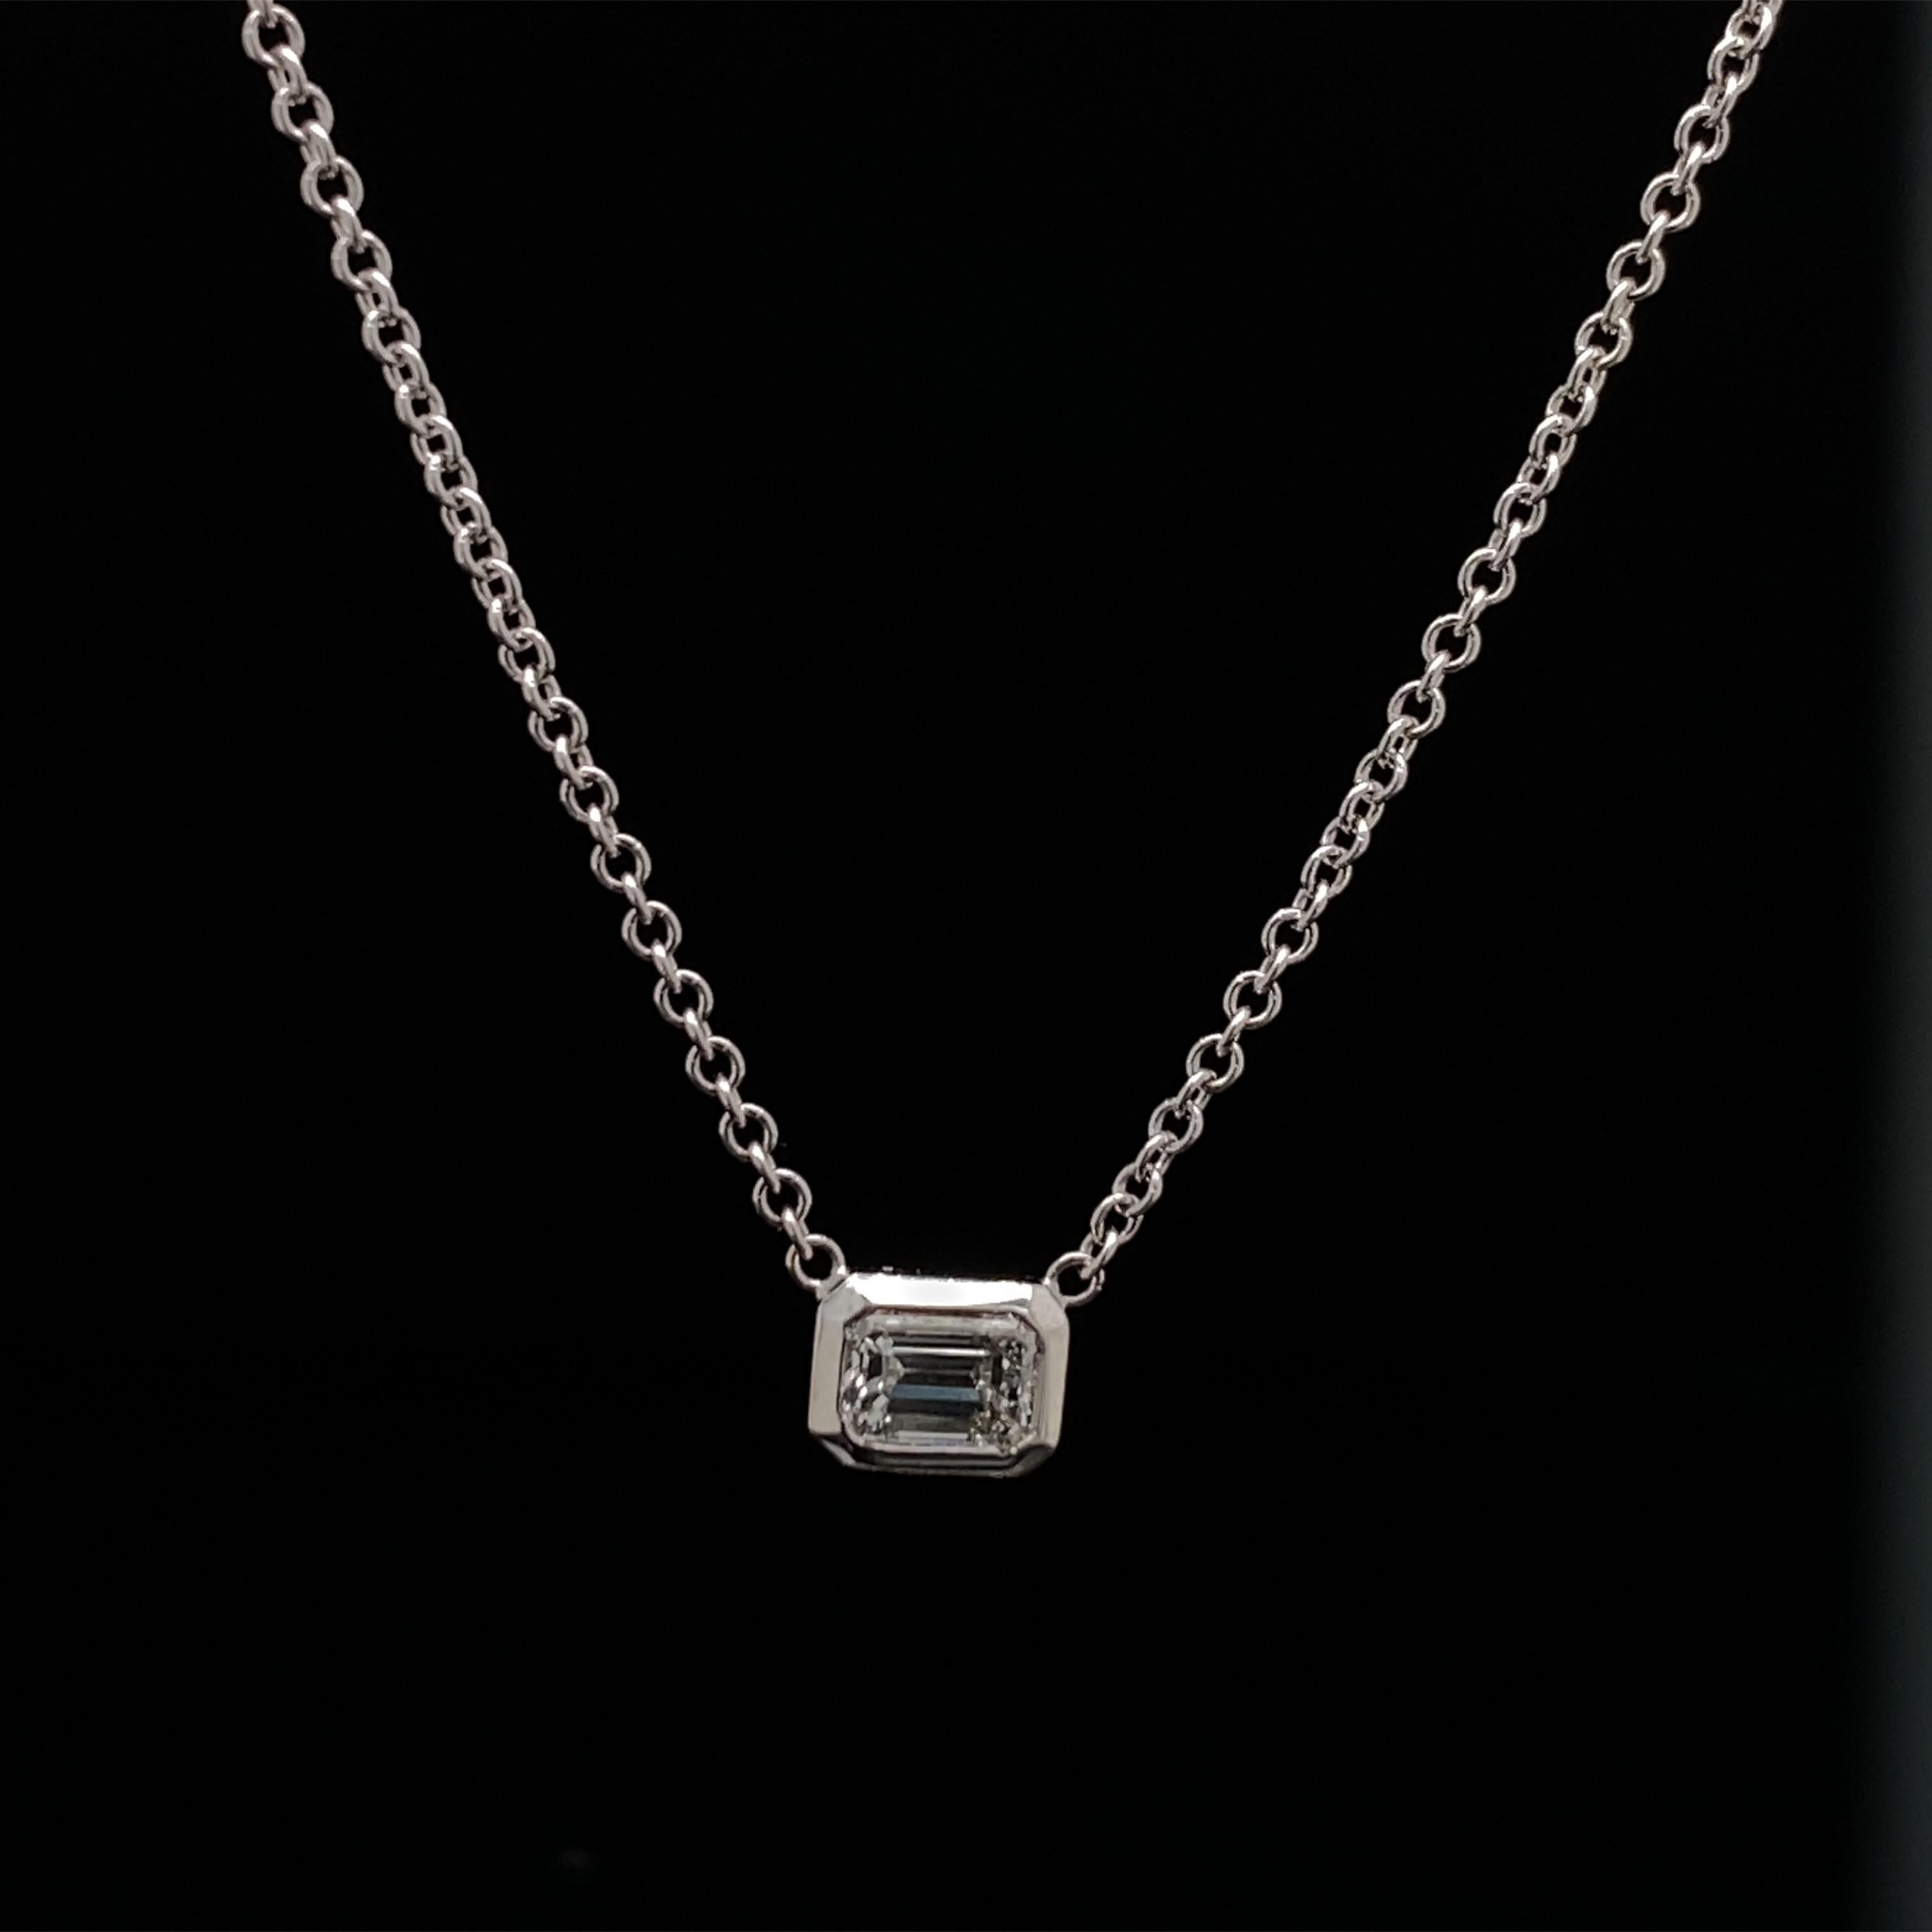 This Pendant features one  Emerald cut diamond that is set horizontally.
The Emerald cut diamond has a total carat weight of 0.17.
The diamond is F color, VS clarity.
The pendant is 16